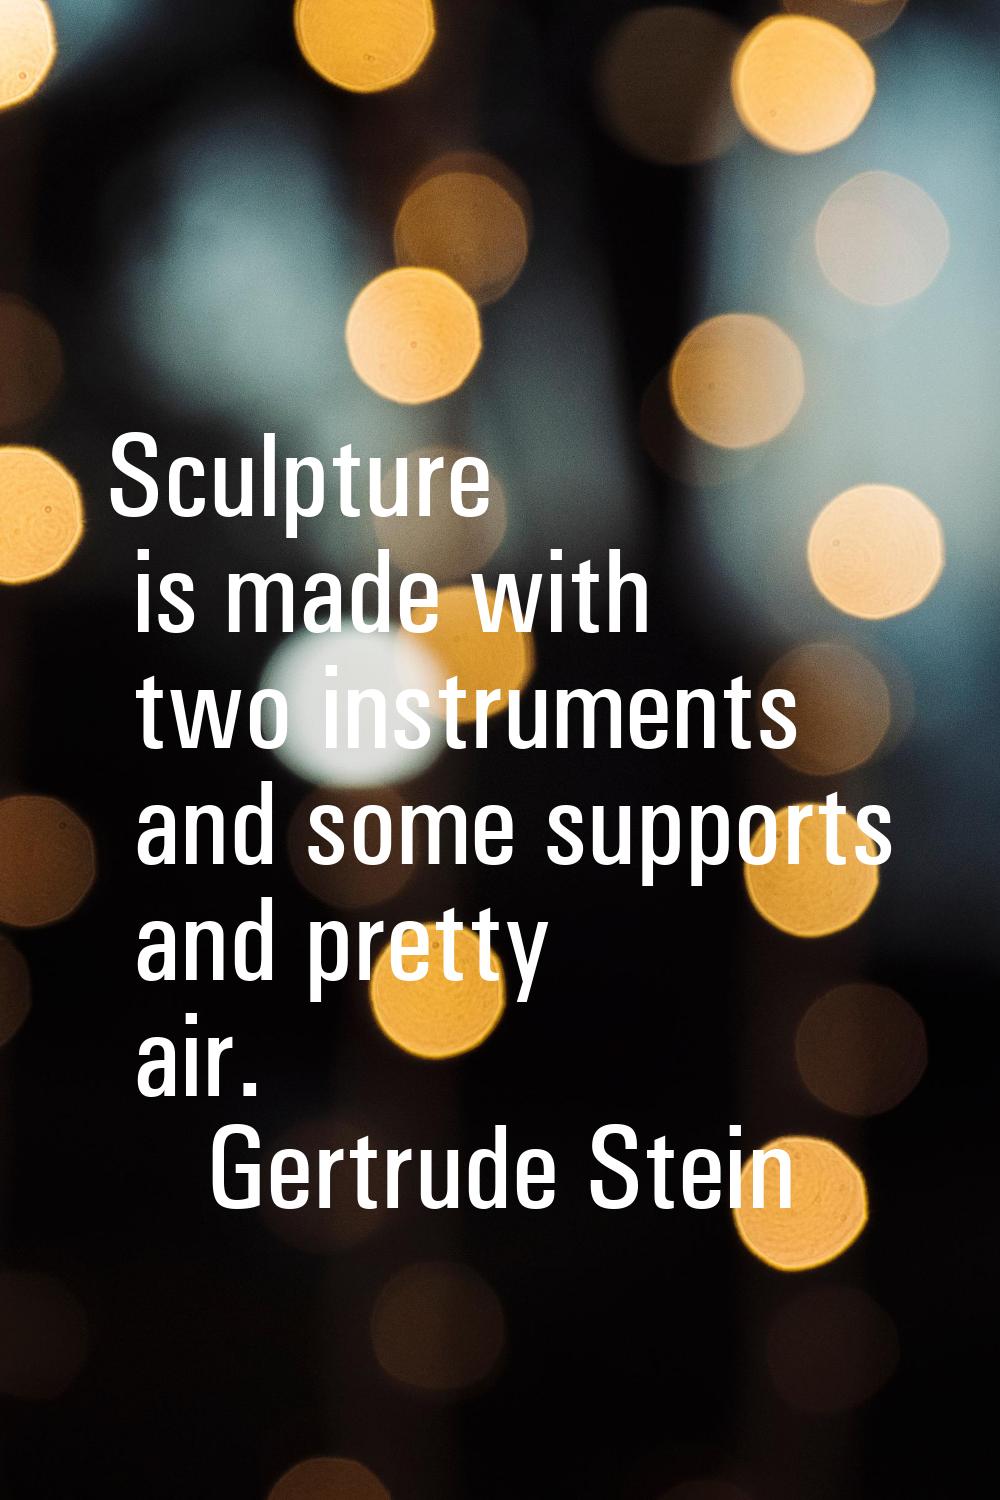 Sculpture is made with two instruments and some supports and pretty air.